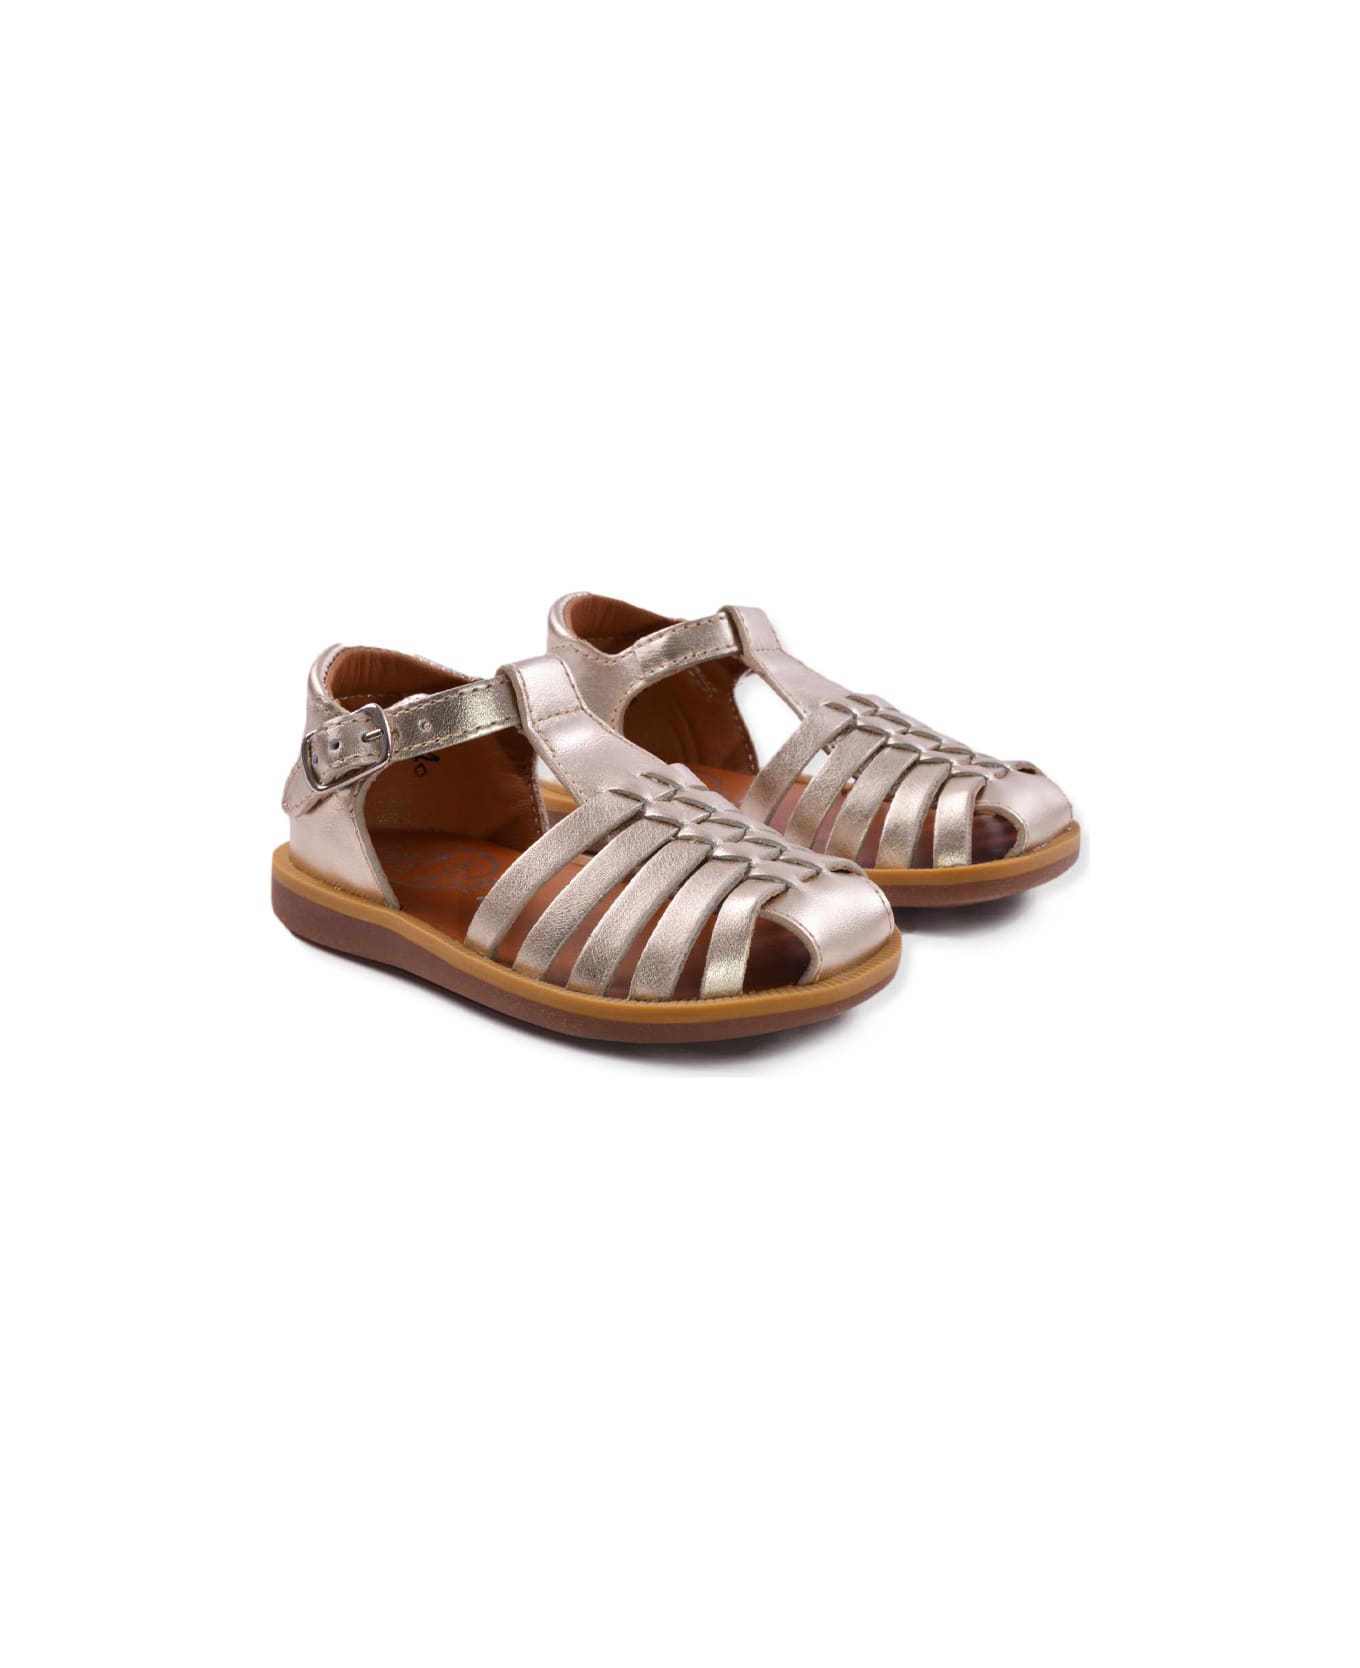 Pom d'Api Sandals In Changing Leather - Grey